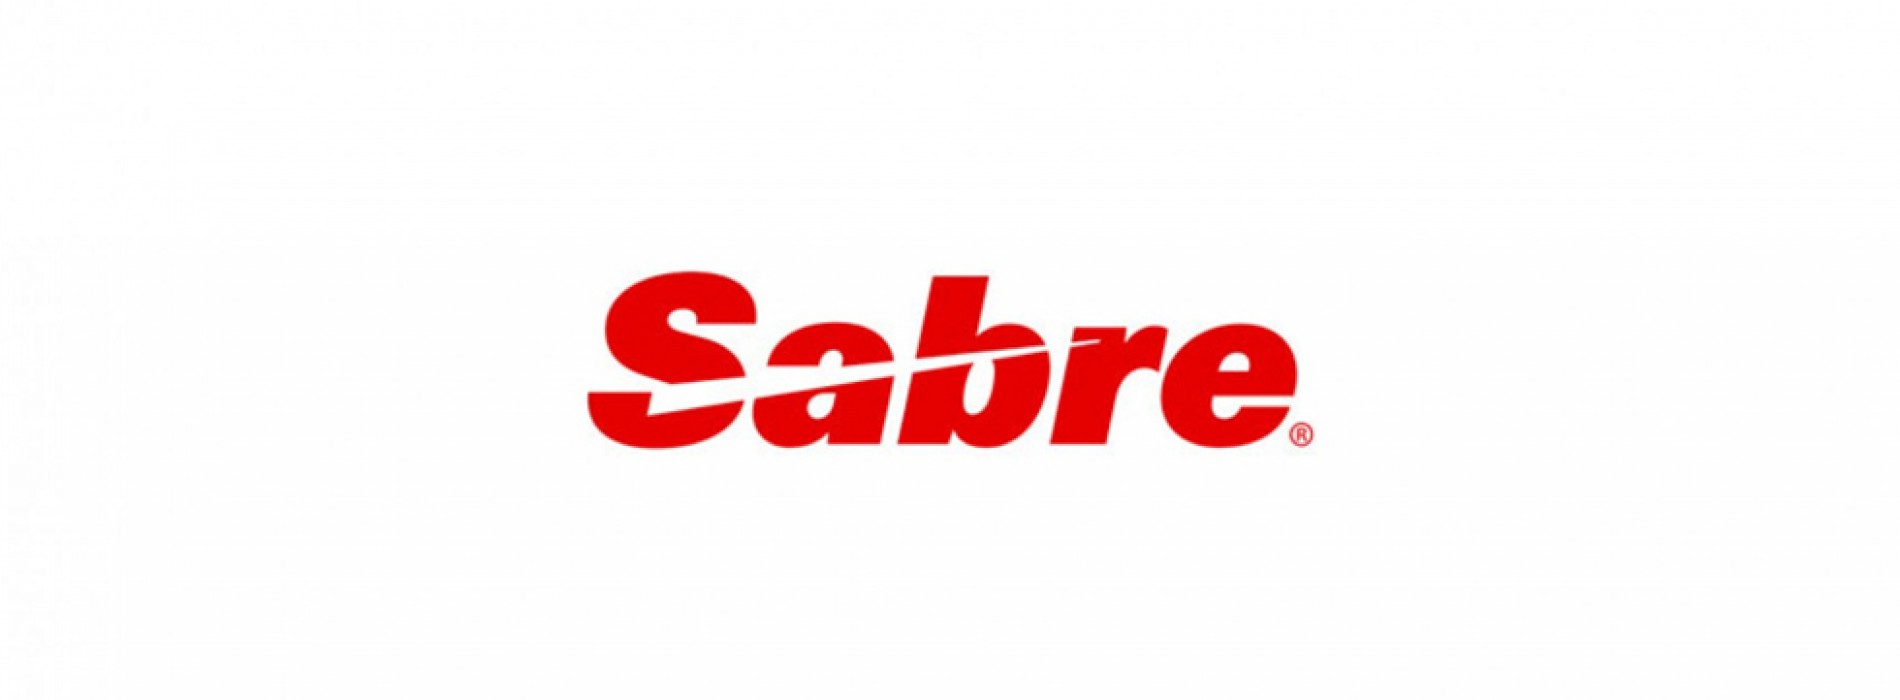 Sabre reports quarterly and full year financial results